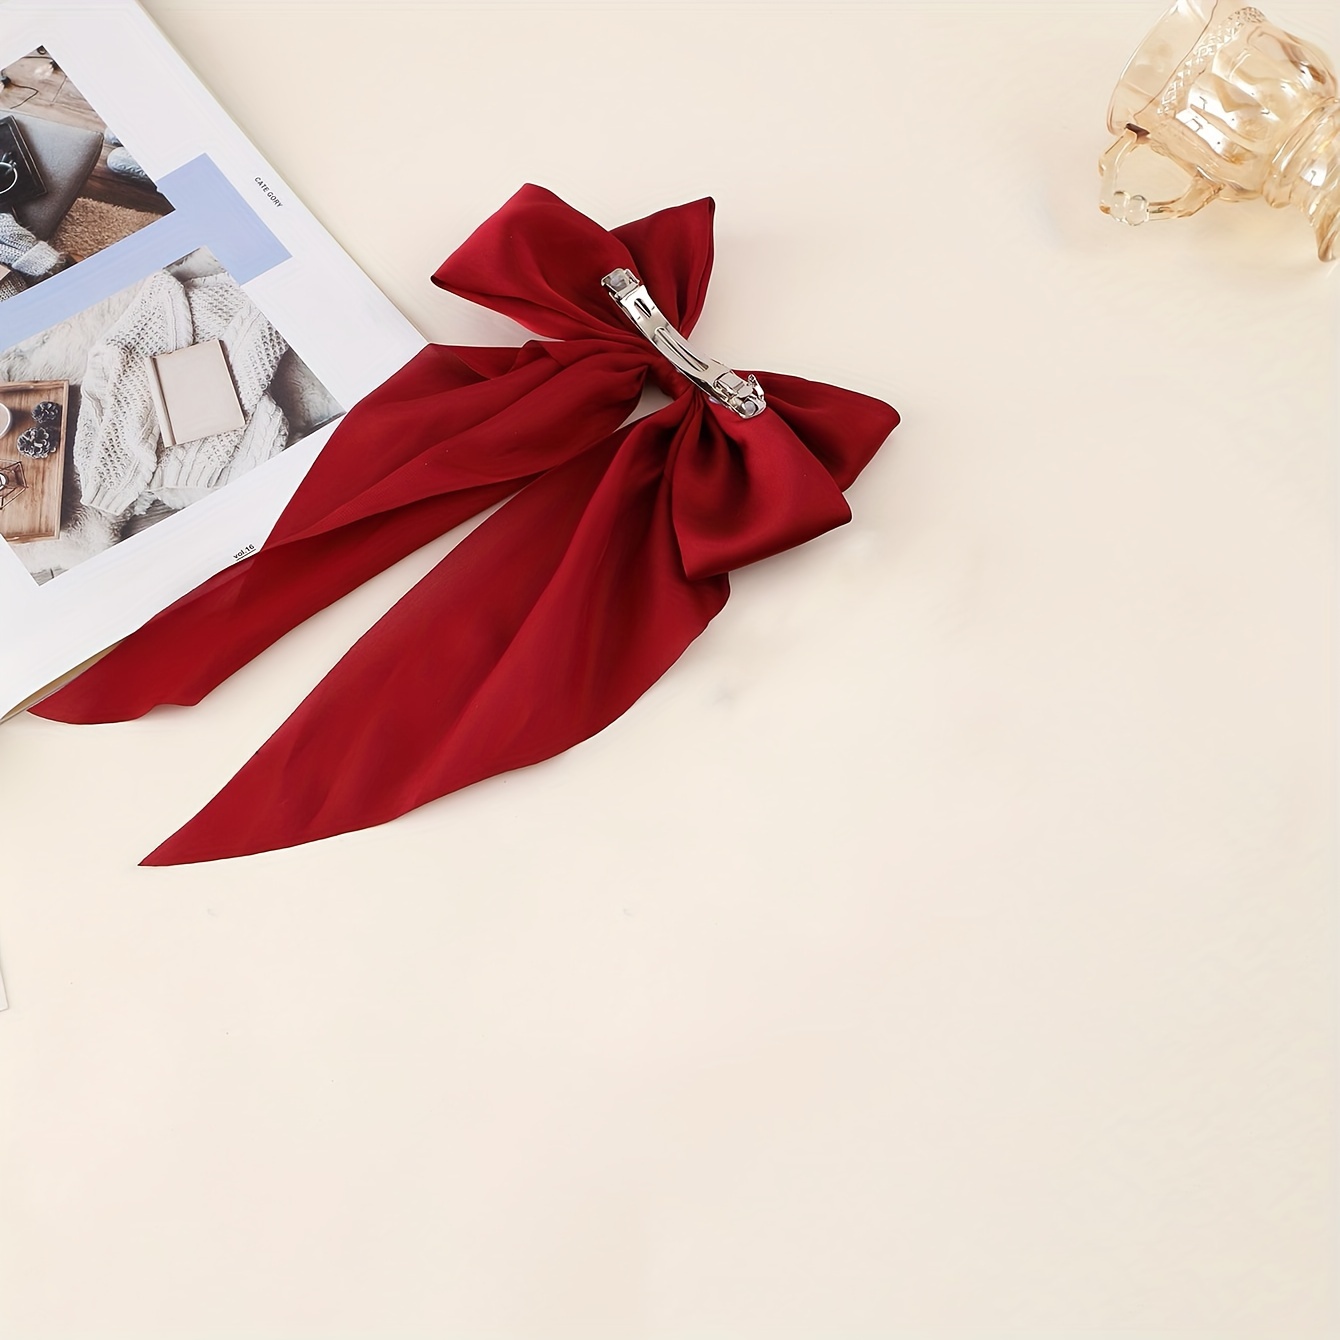 1pc Women's Plush Vintage Red Ribbon Bow Hair Clip For Daily Use